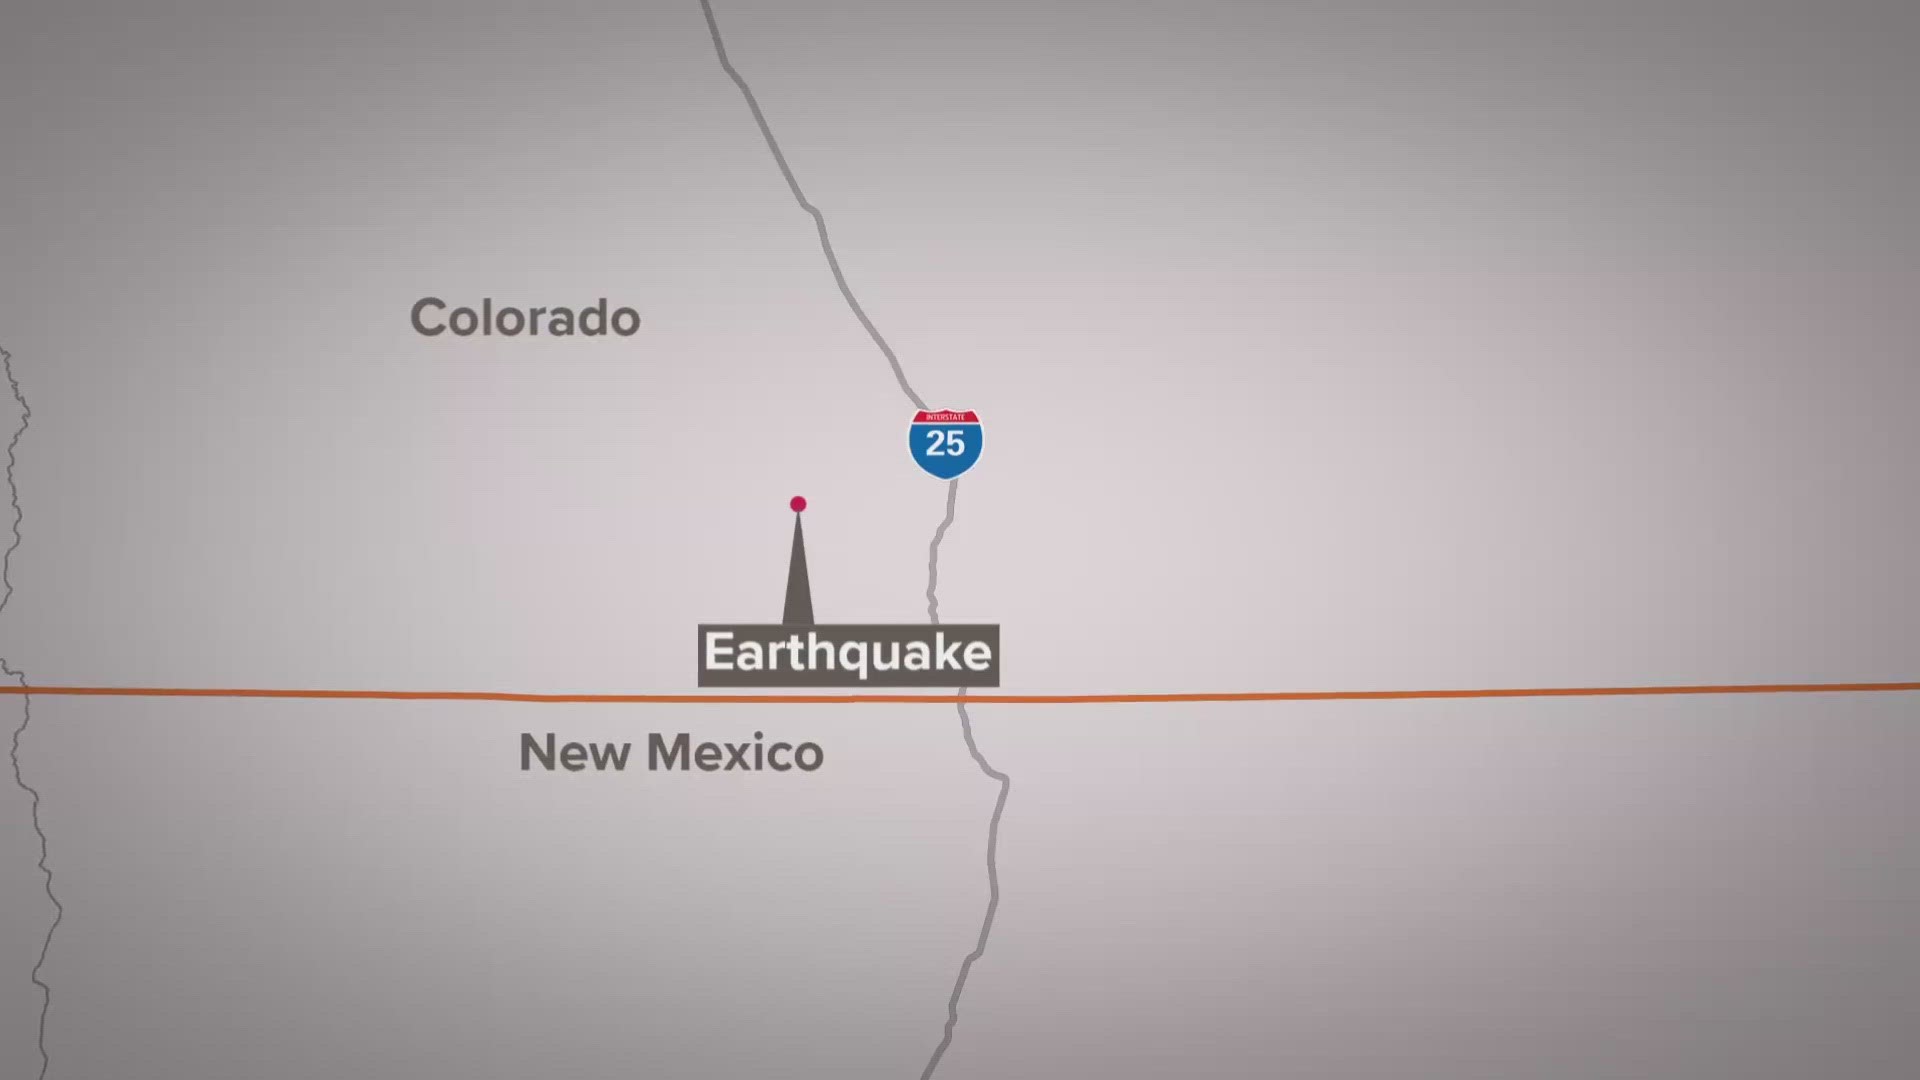 The biggest of several earthquakes hit around 11 p.m. Thursday. It had a magnitude of 4.3, according to USGS.